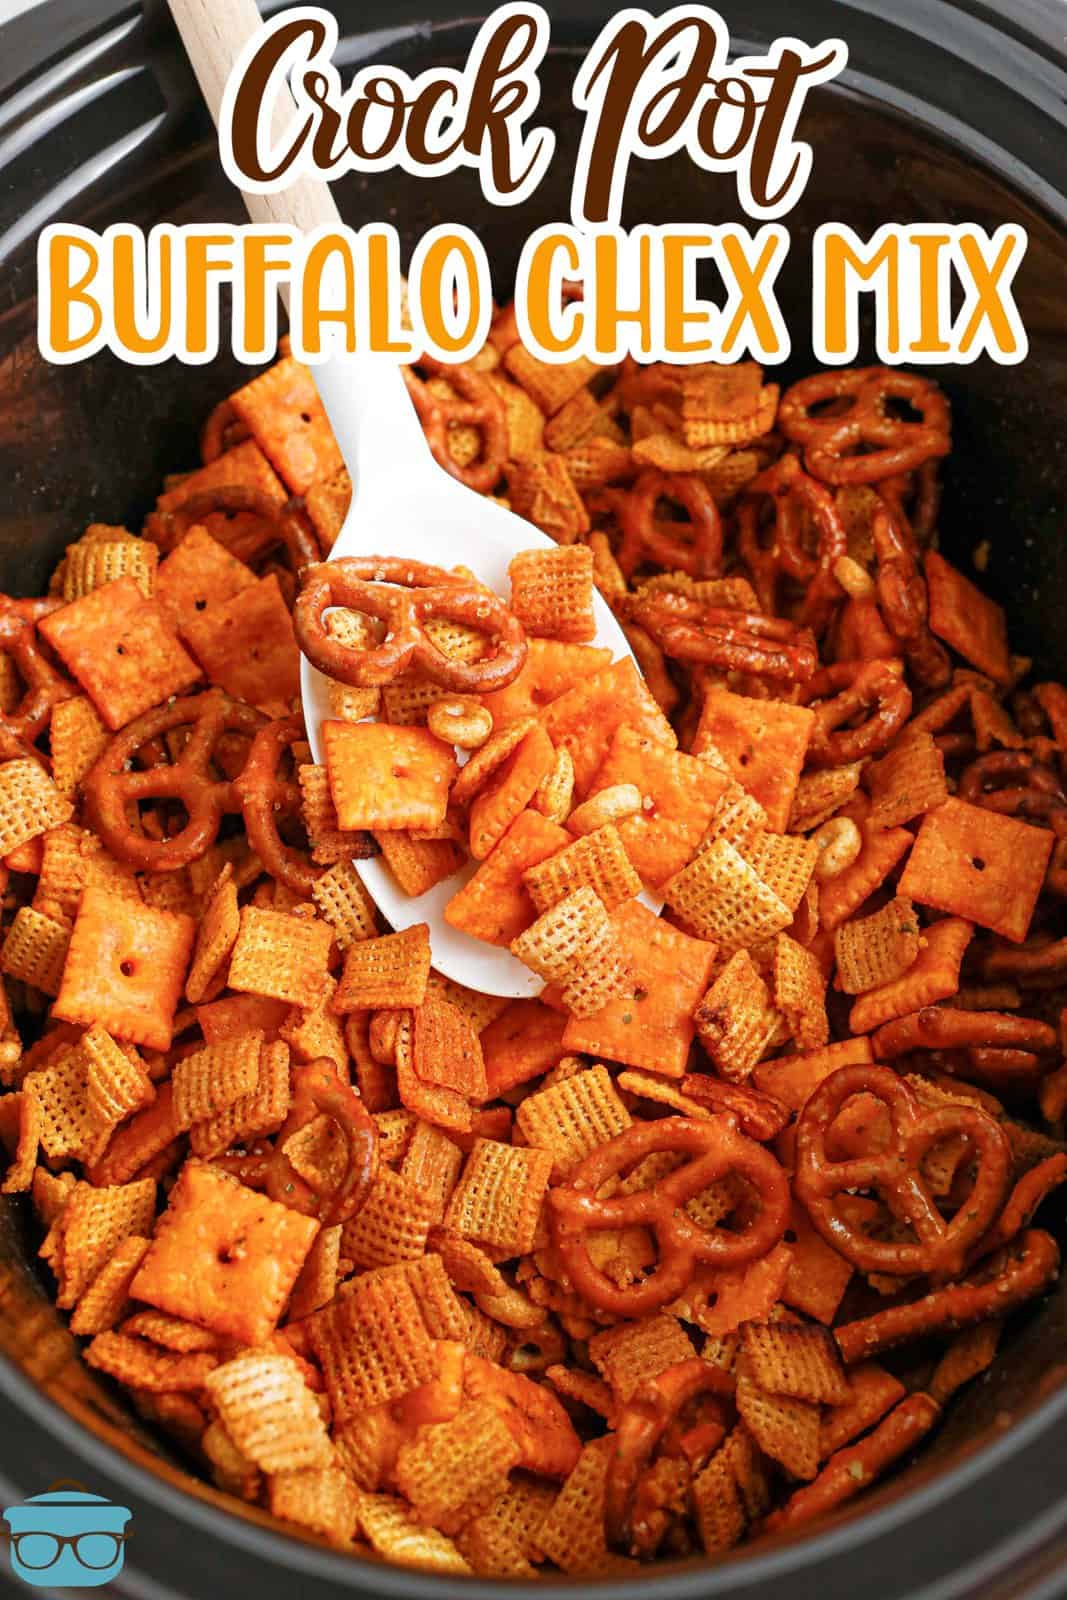 A serving spoon getting some Buffalo Ranch Chex Mix.